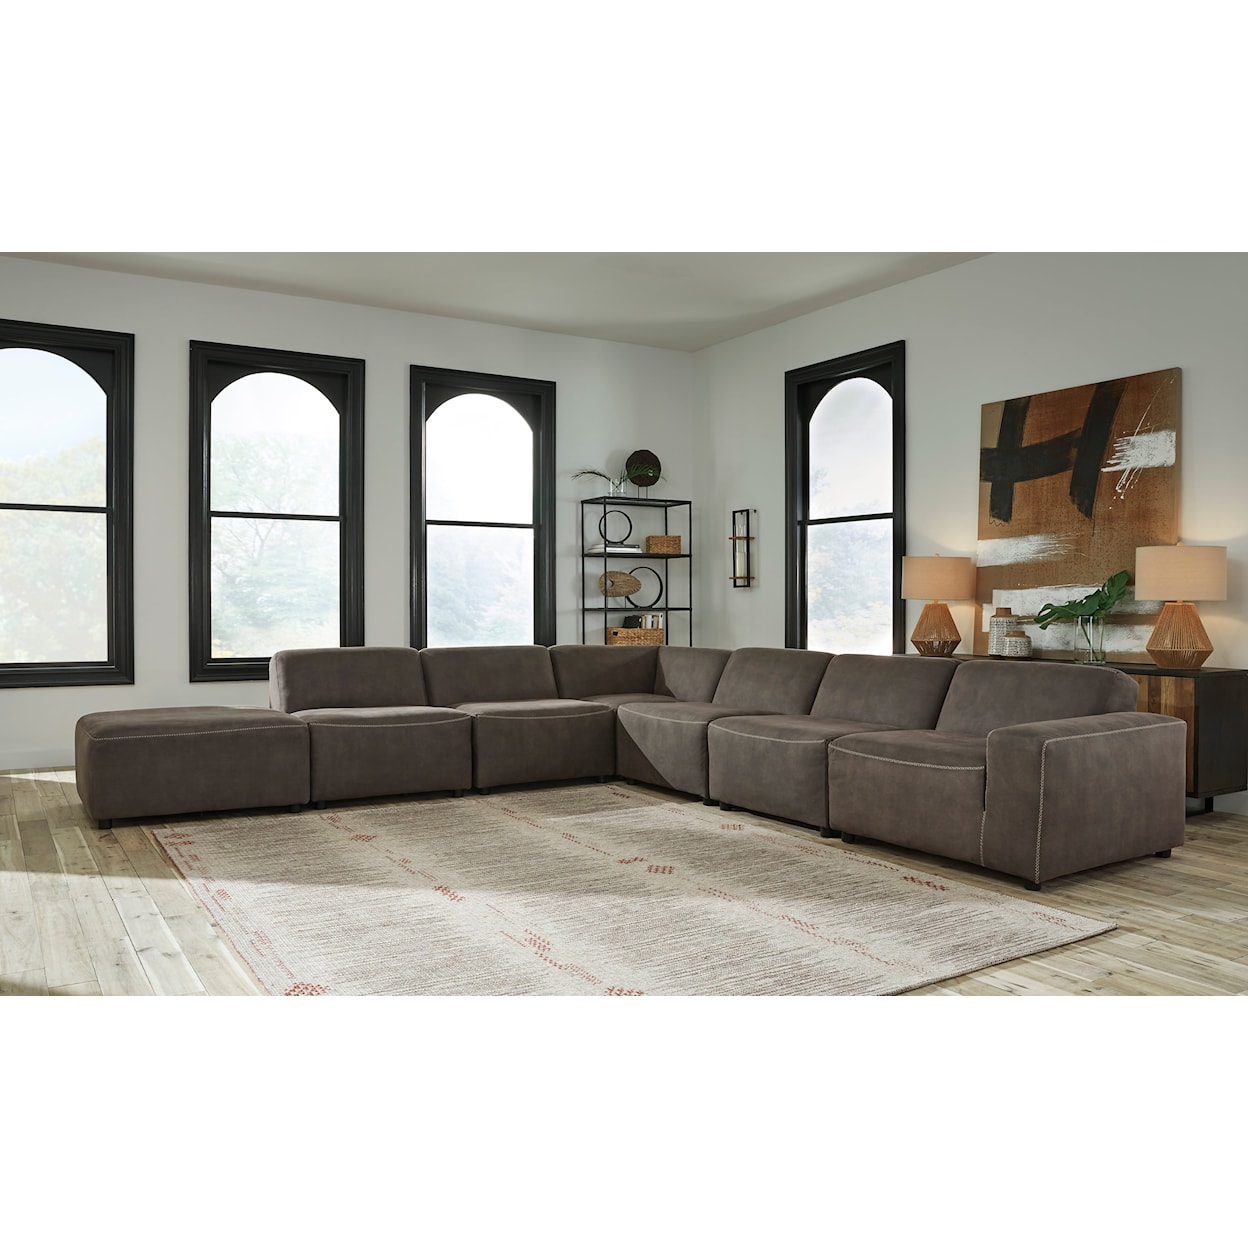 Benchcraft Allena 7-Piece Sectional